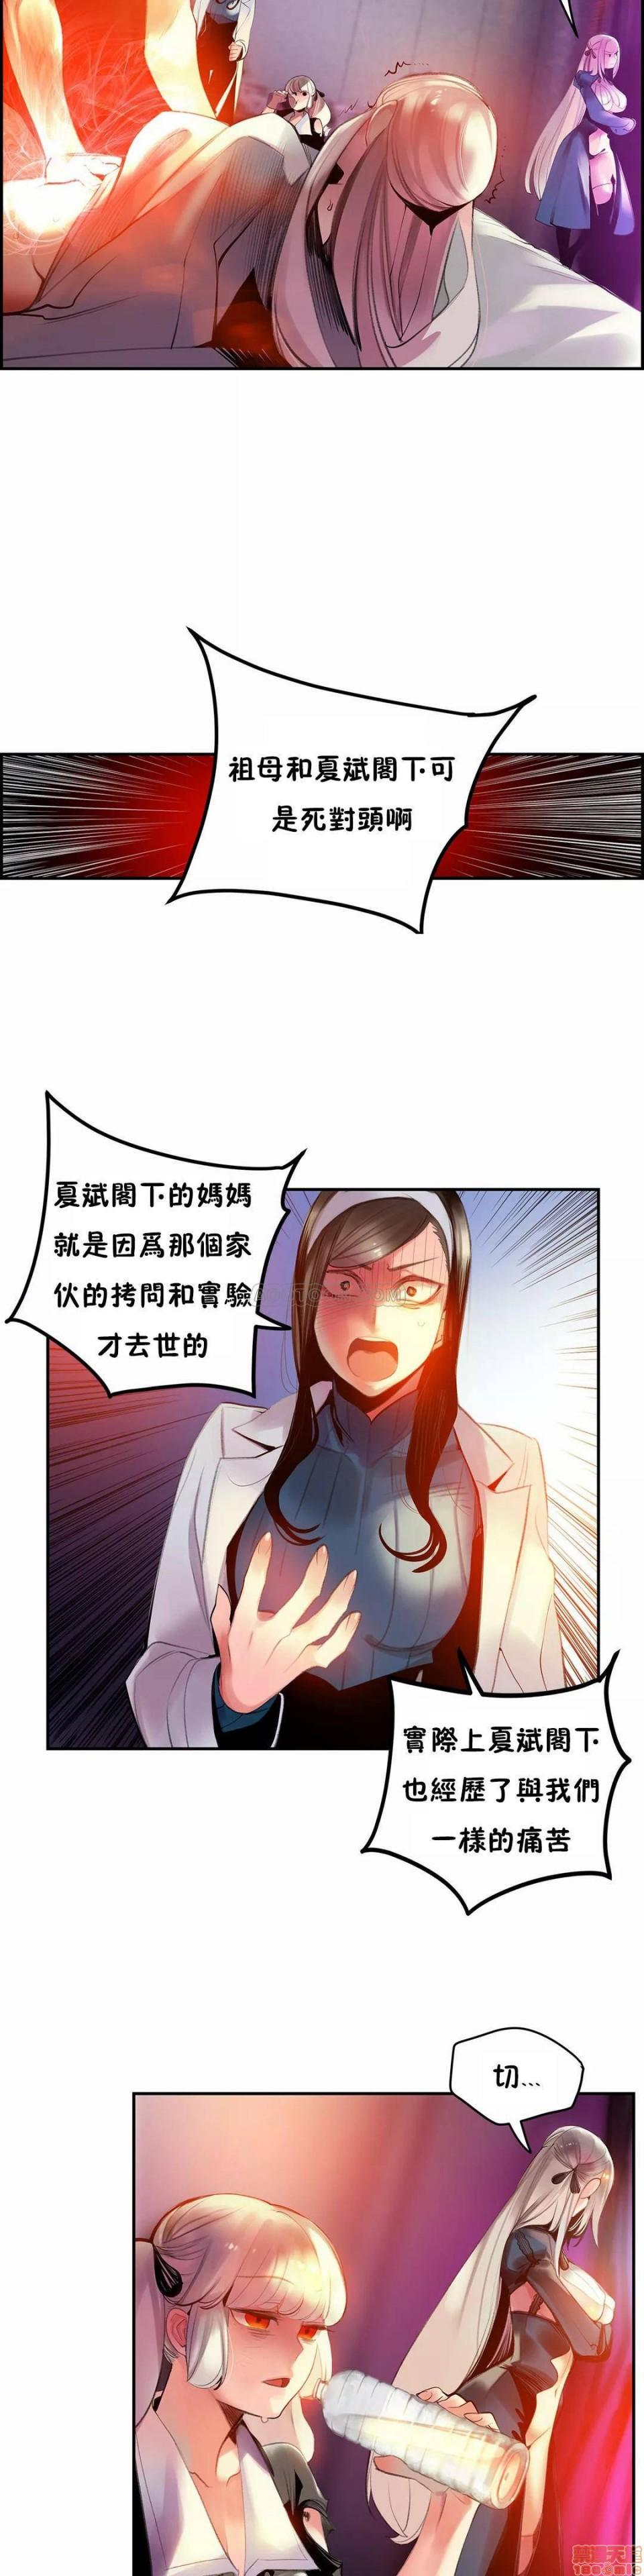 [Juder] Lilith`s Cord (第二季) Ch.77-93 end [Chinese] 10